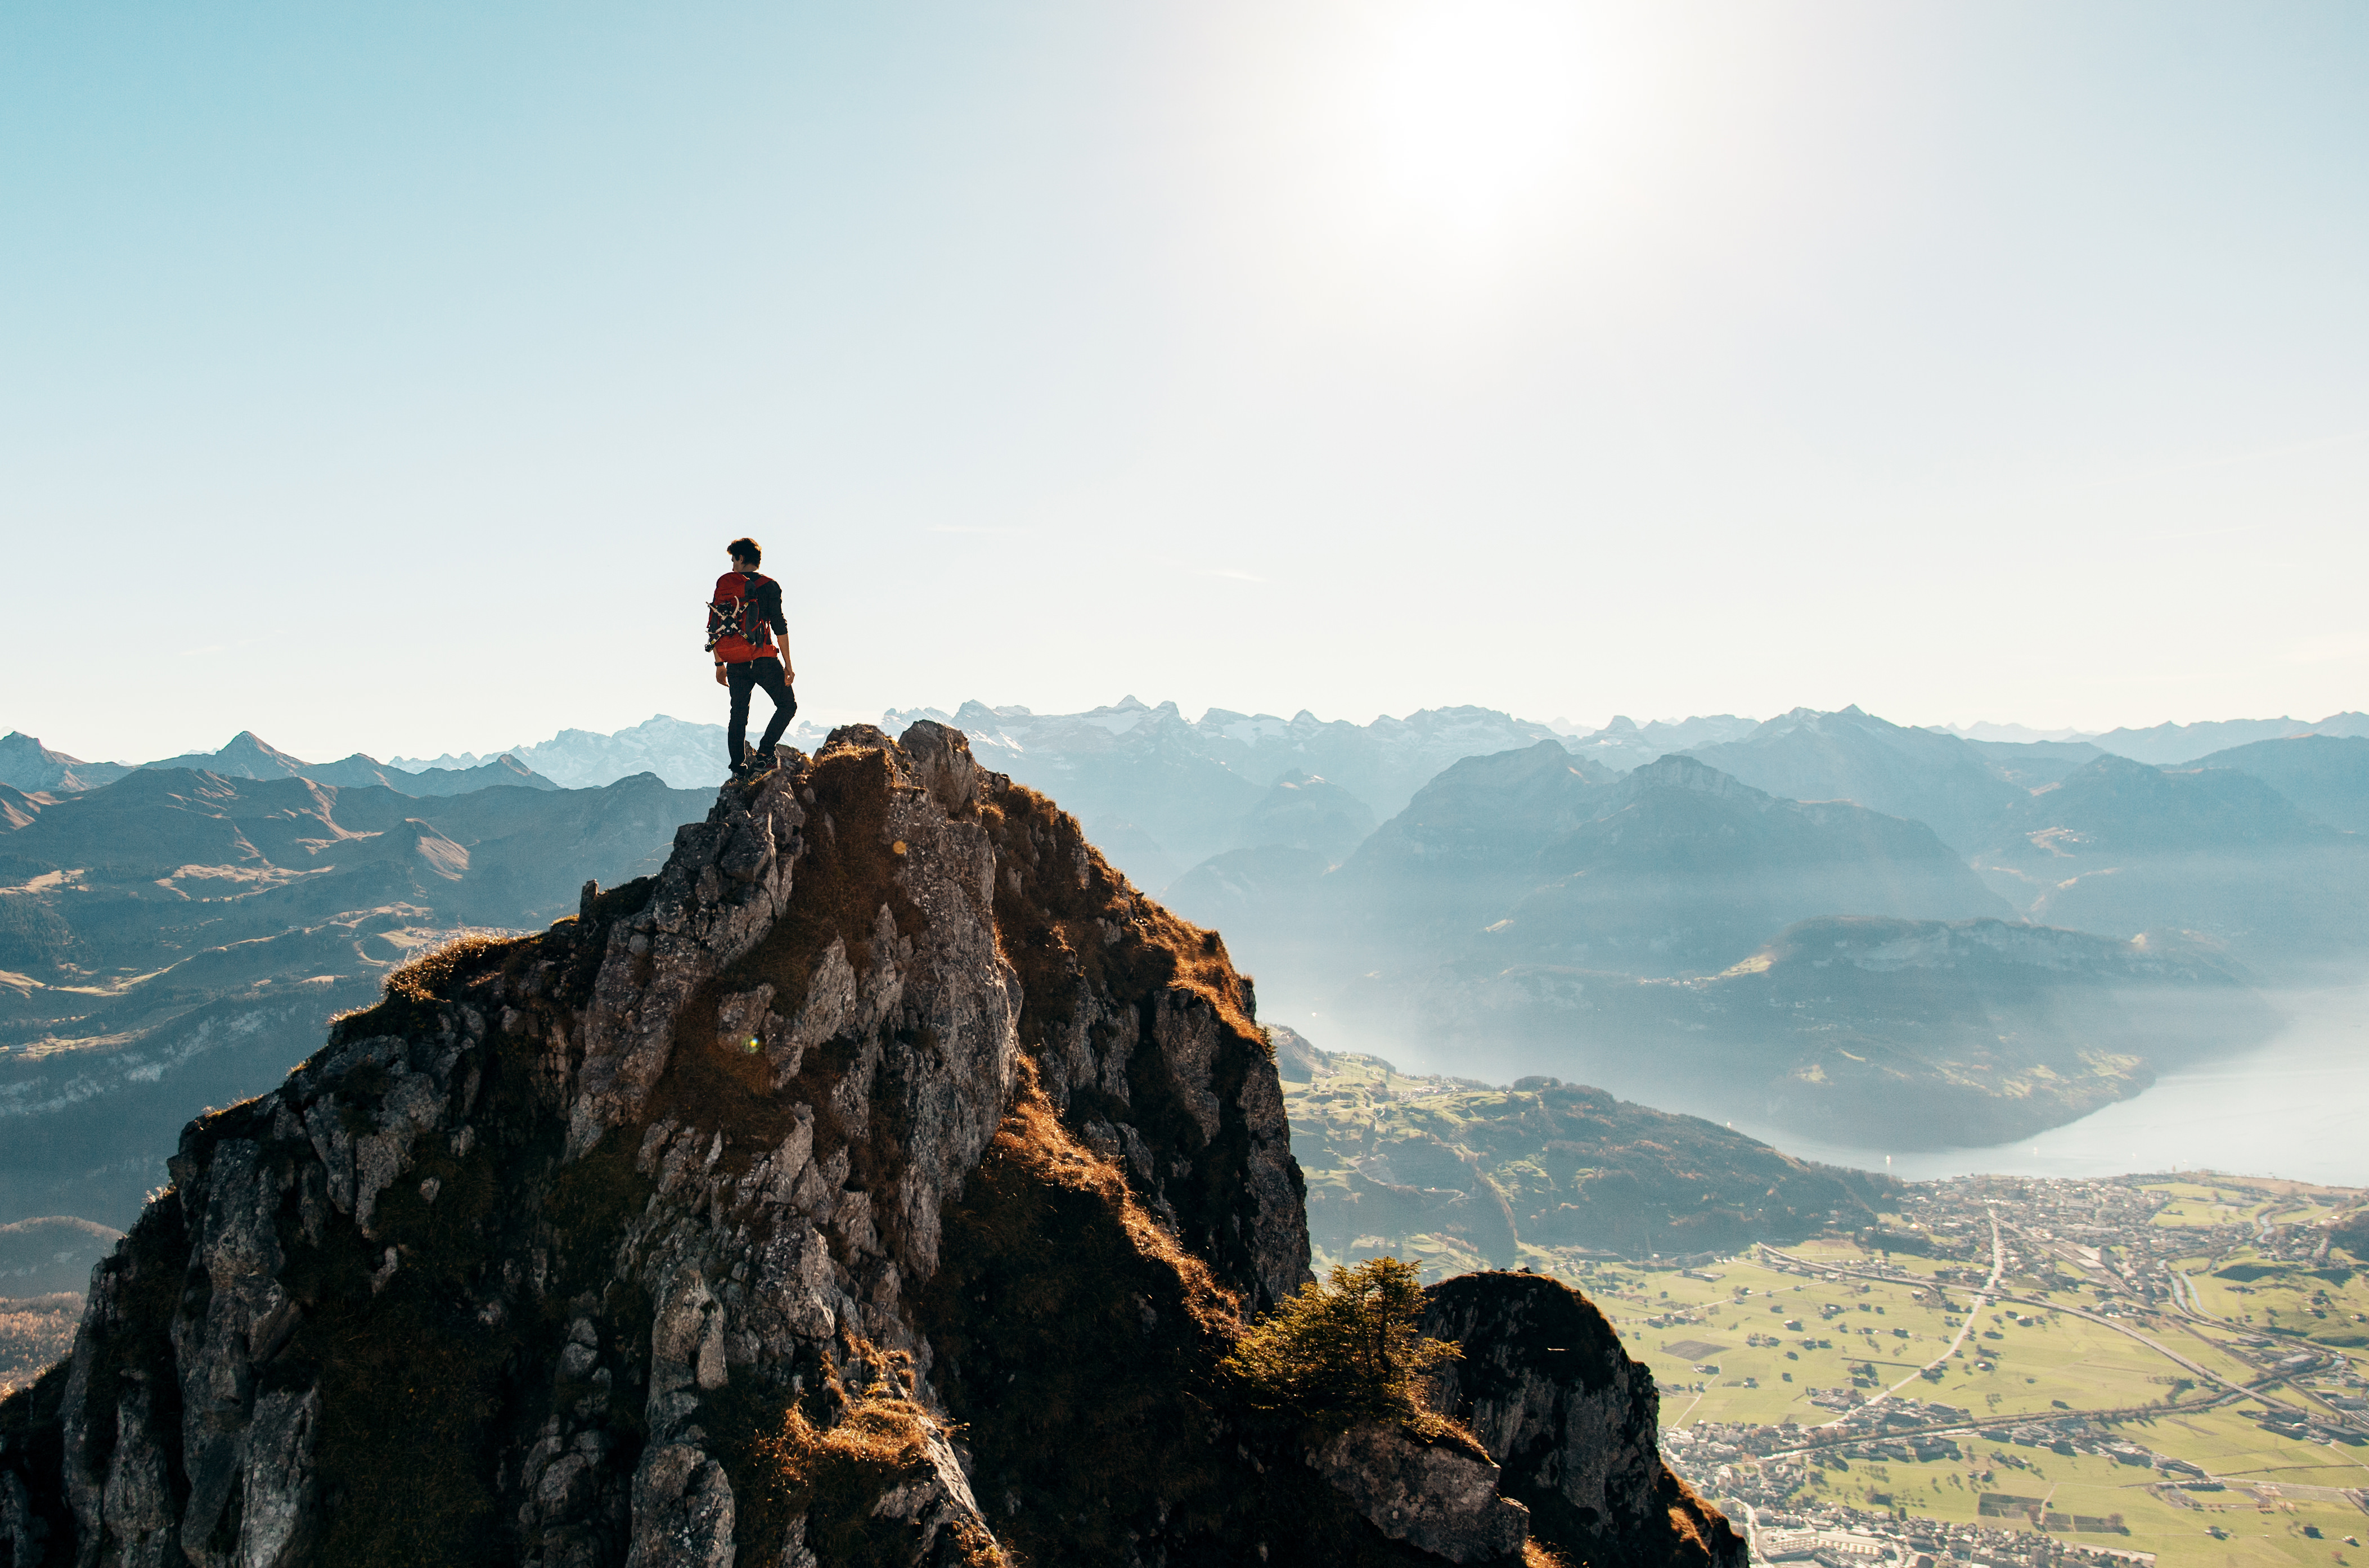 Man standing on mountain. Represents pushing yourself to the right amount